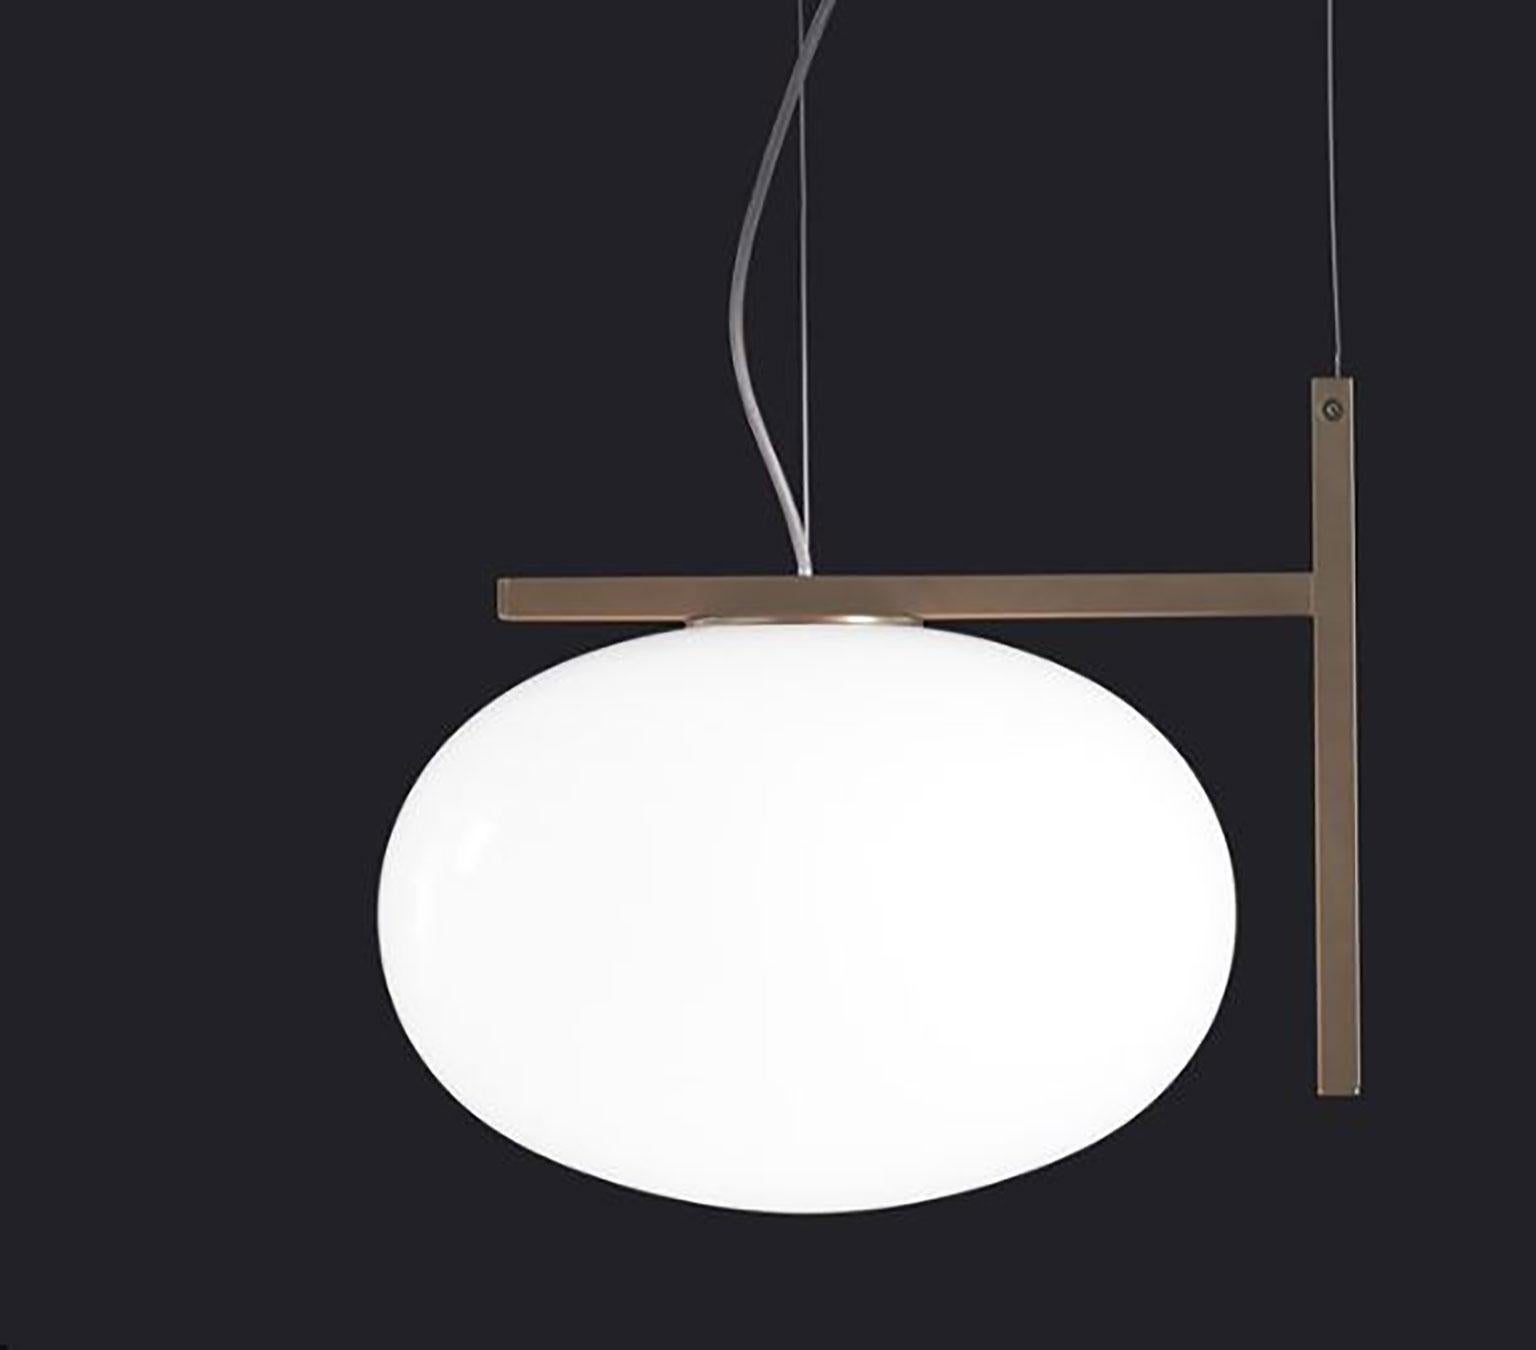 Alba suspension lamp designed by Mariana Pellegrino Soto for Oluce. The shape of the lamp resembles a drop of water, bringing the world of nature into this design. This lamp rests on a frame of satin brass that gives the lamp a modern look but also